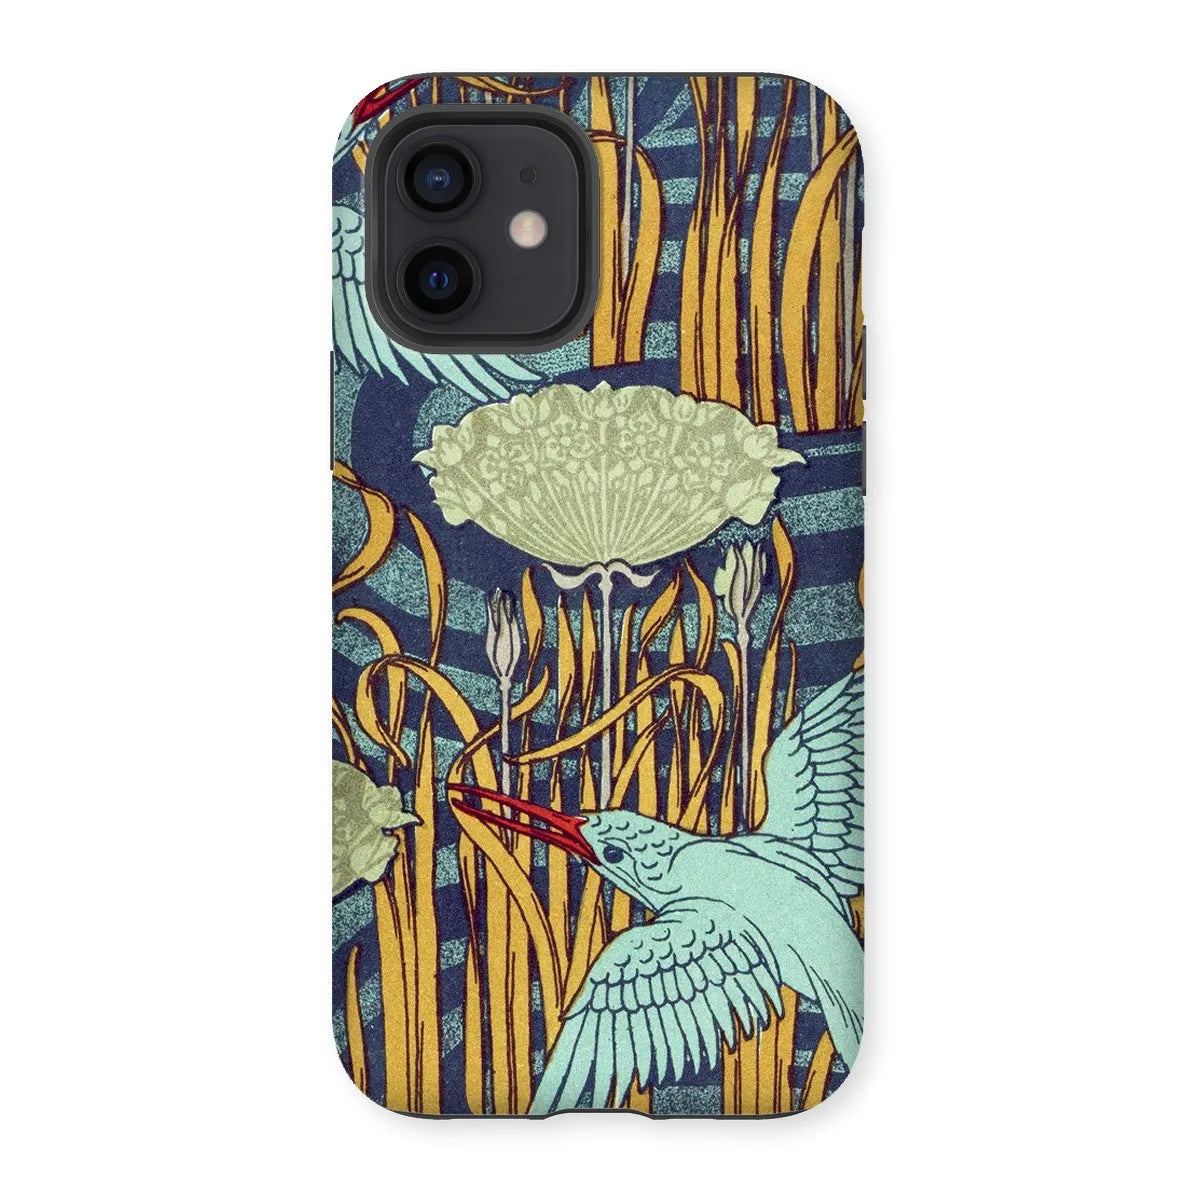 Kingfishers French Art Phone Case - Maurice Pillard Verneuil - Iphone 12 / Matte - Mobile Phone Cases - Aesthetic Art